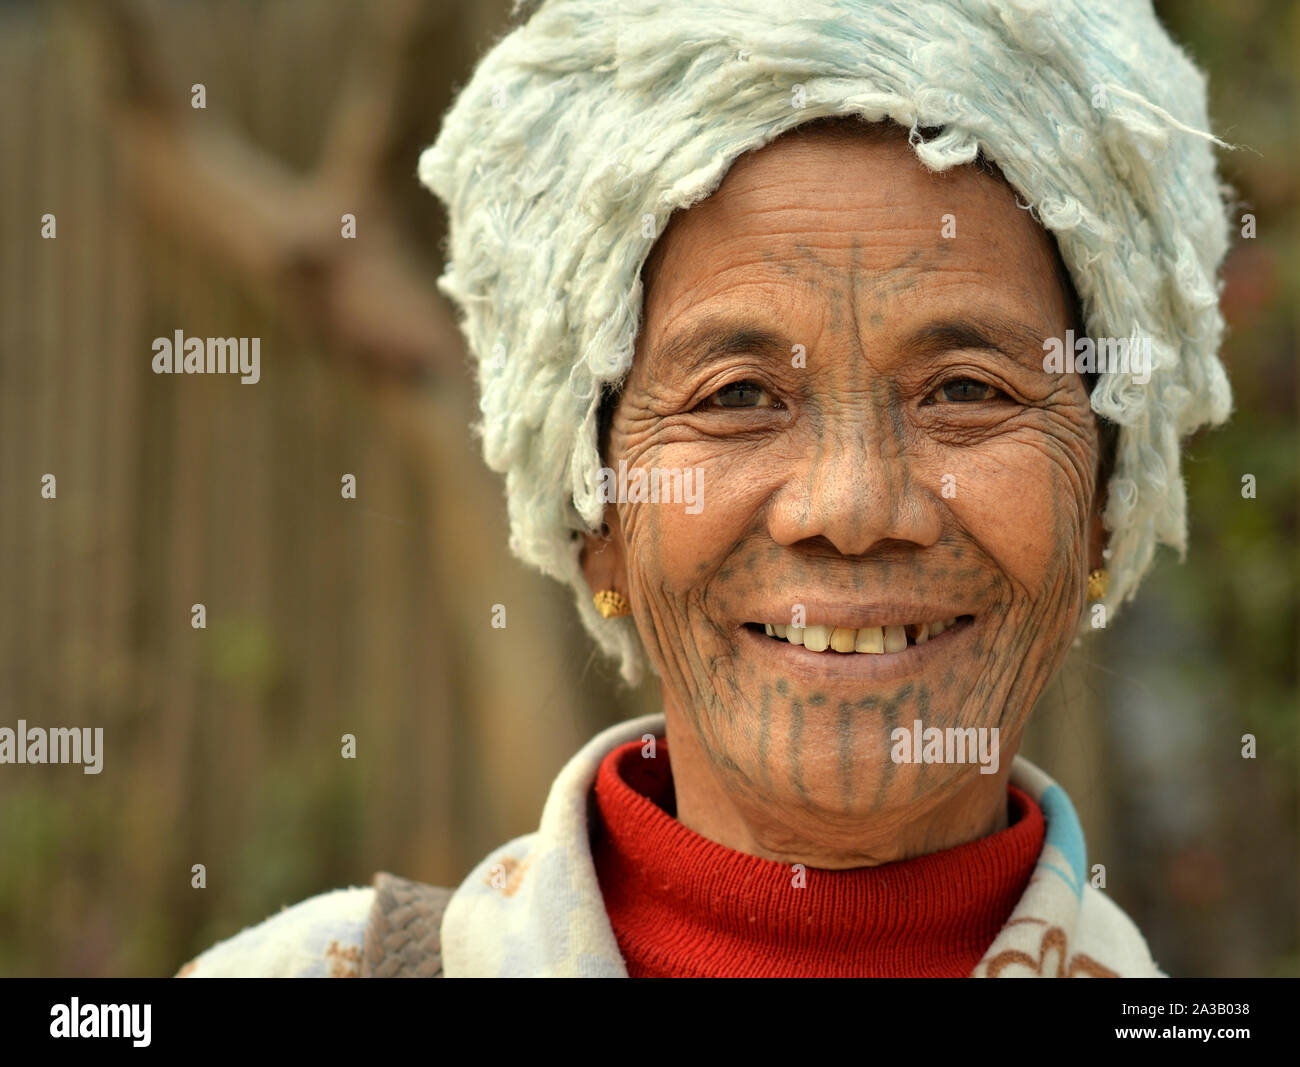 Elderly Chin Muun tribal woman ("spider woman") with traditional facial tattoo smiles for the camera. Stock Photo